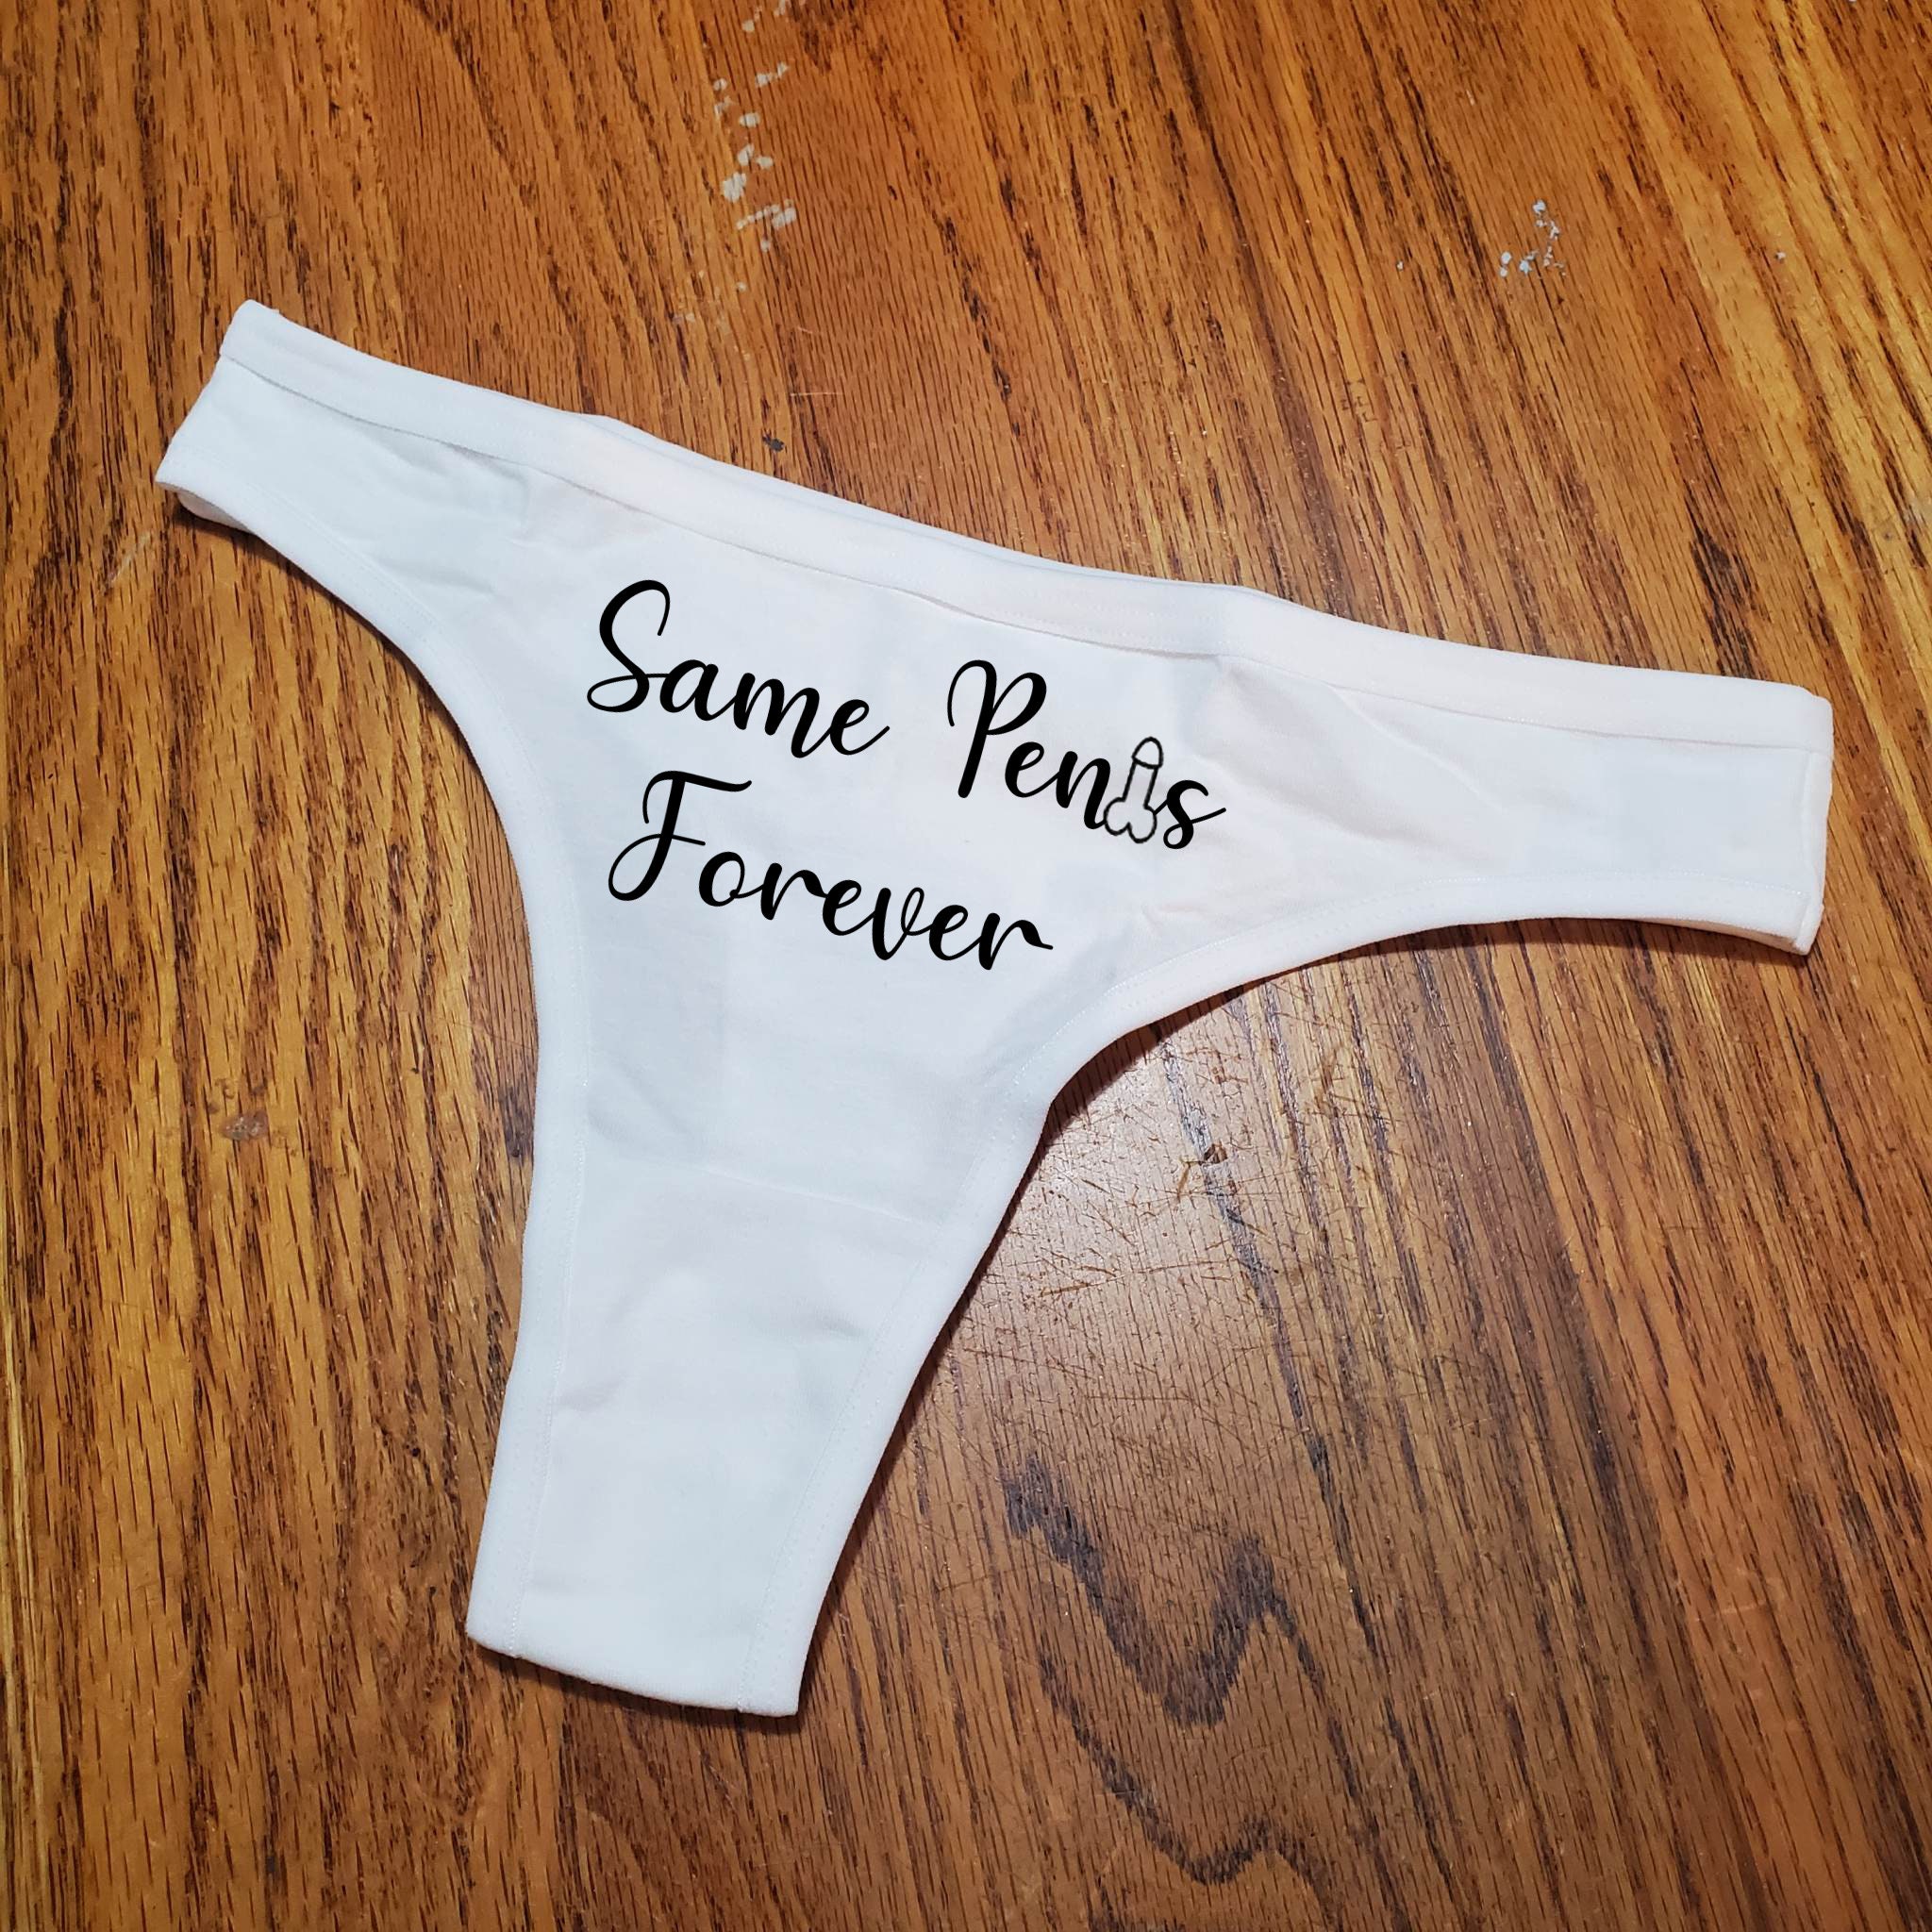  Knaughty Knickers - Same Penis Forever - White Boyshort - Funny  Gag Gift Underwear - Panty Game Bachelorette Lingerie Shower - Printed on  Front: Clothing, Shoes & Jewelry